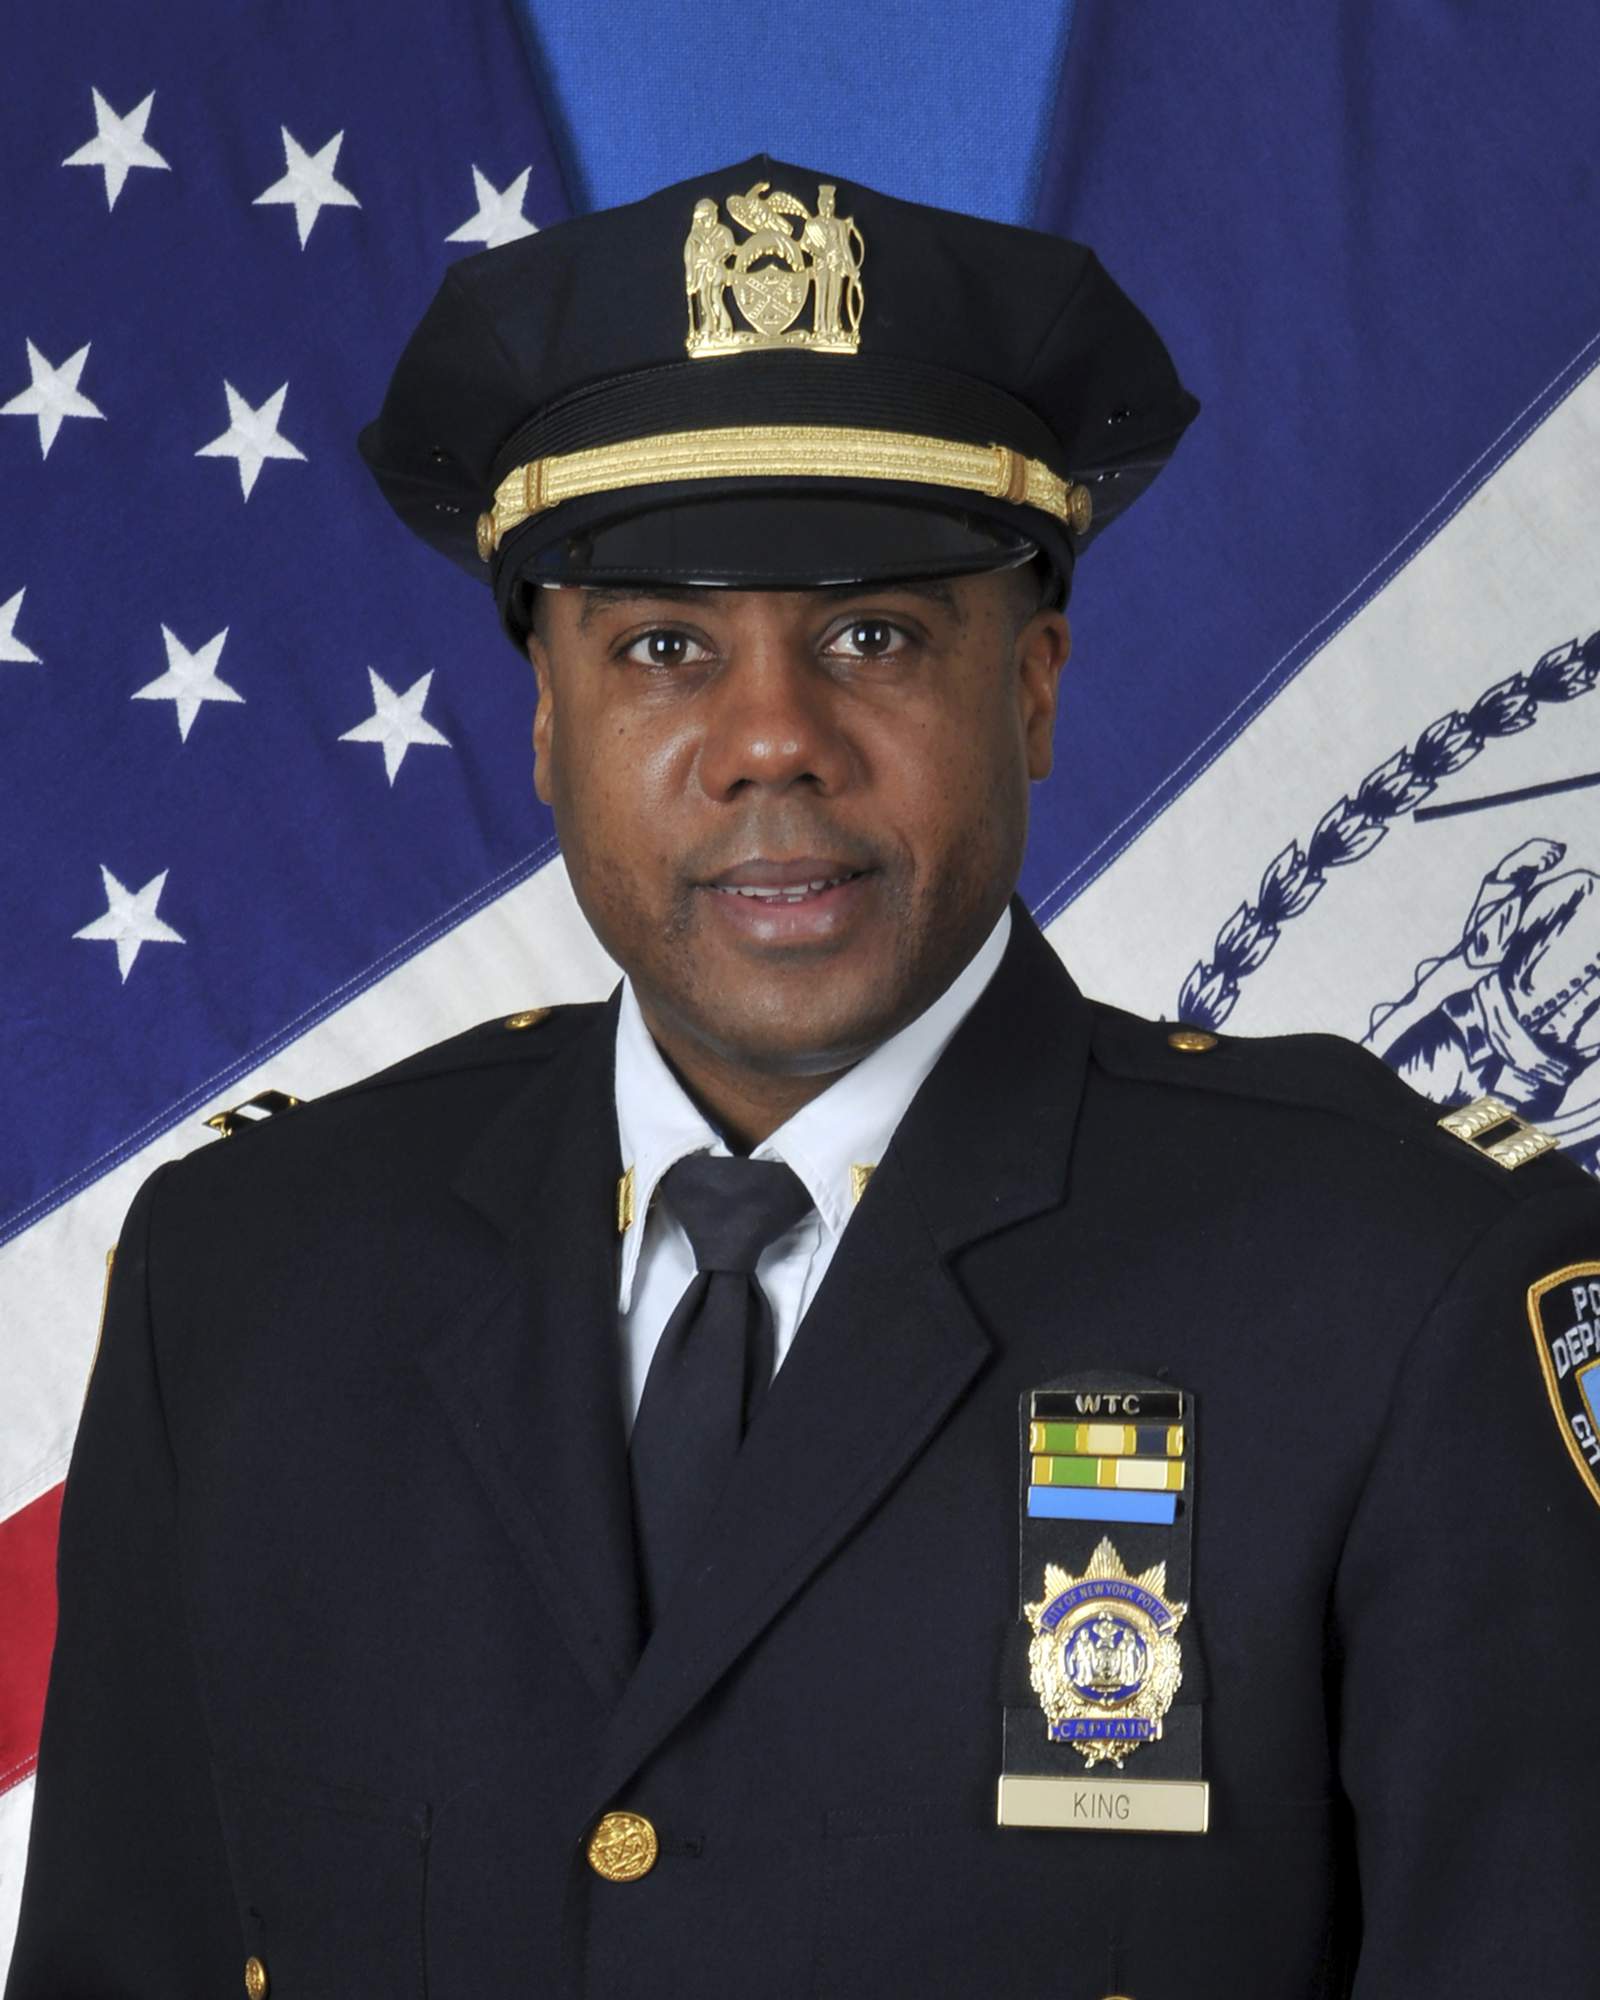 NYC's new sex crimes chief has a background in nursing